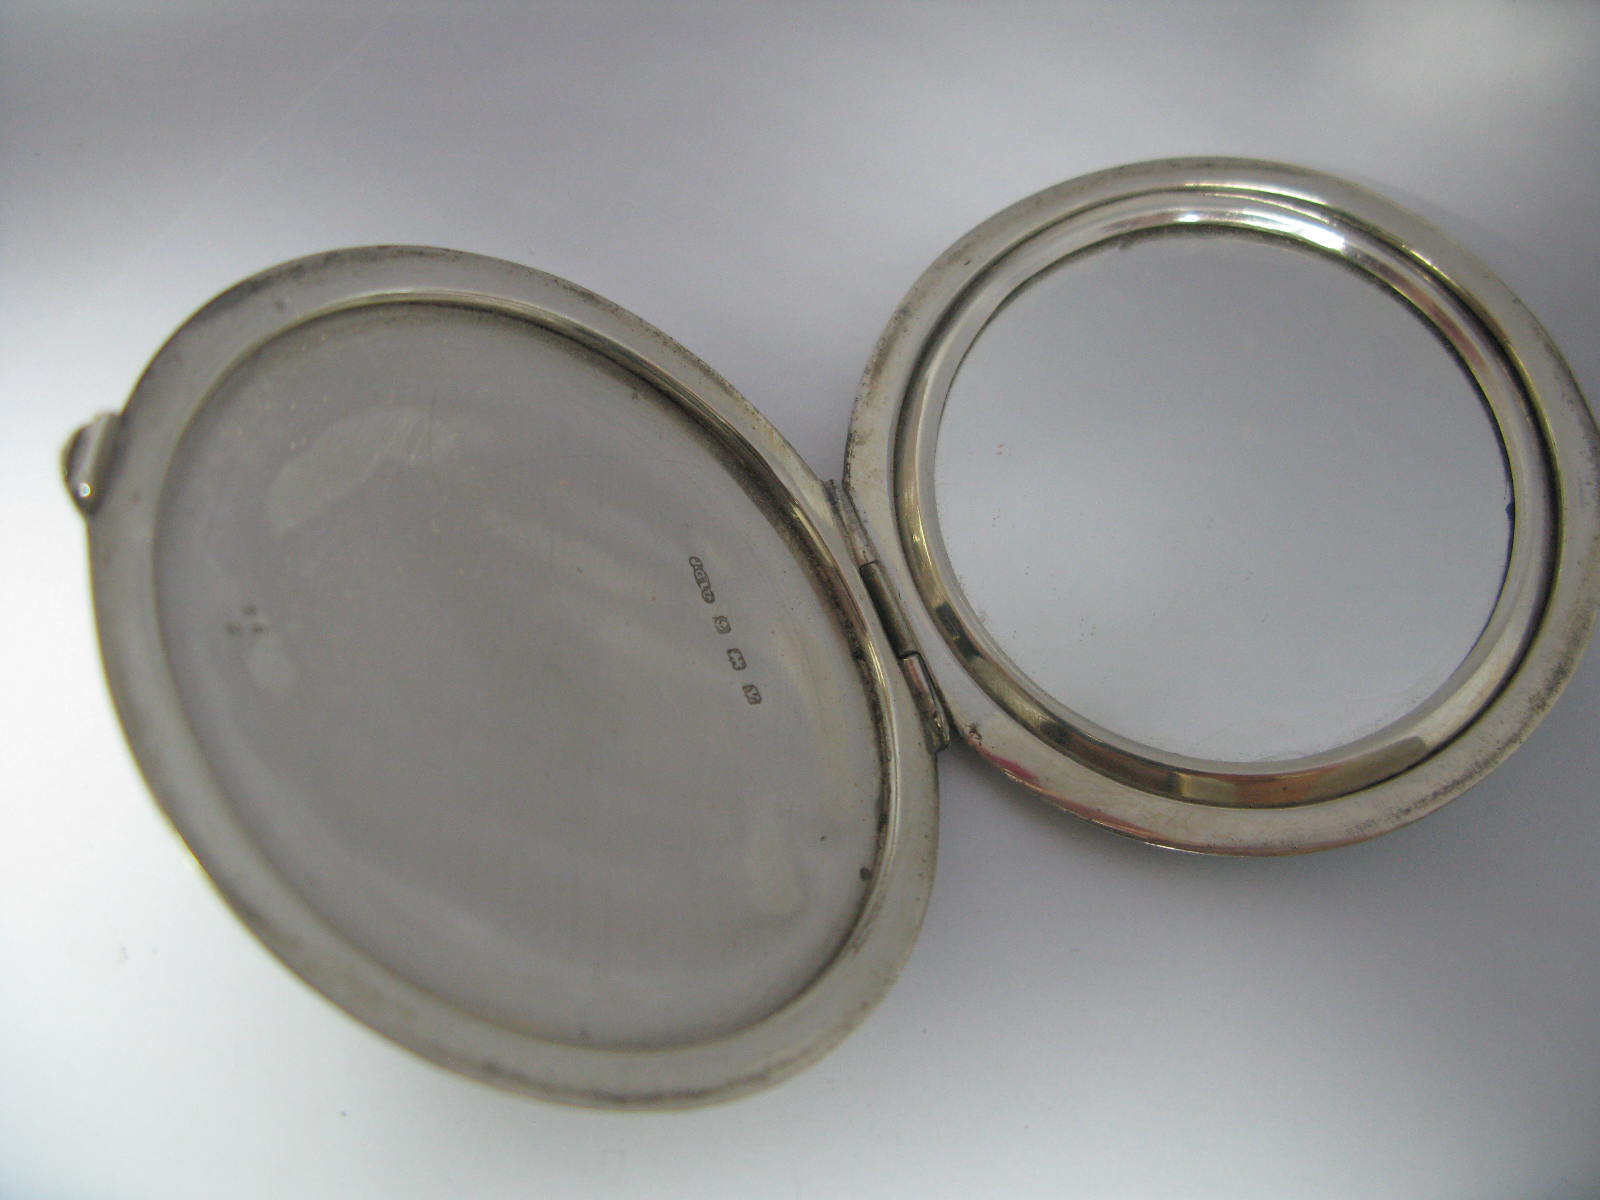 A Hallmarked Silver and Pale Blue Enamel Circular Ladies Compact (lacking puff). - Image 4 of 4